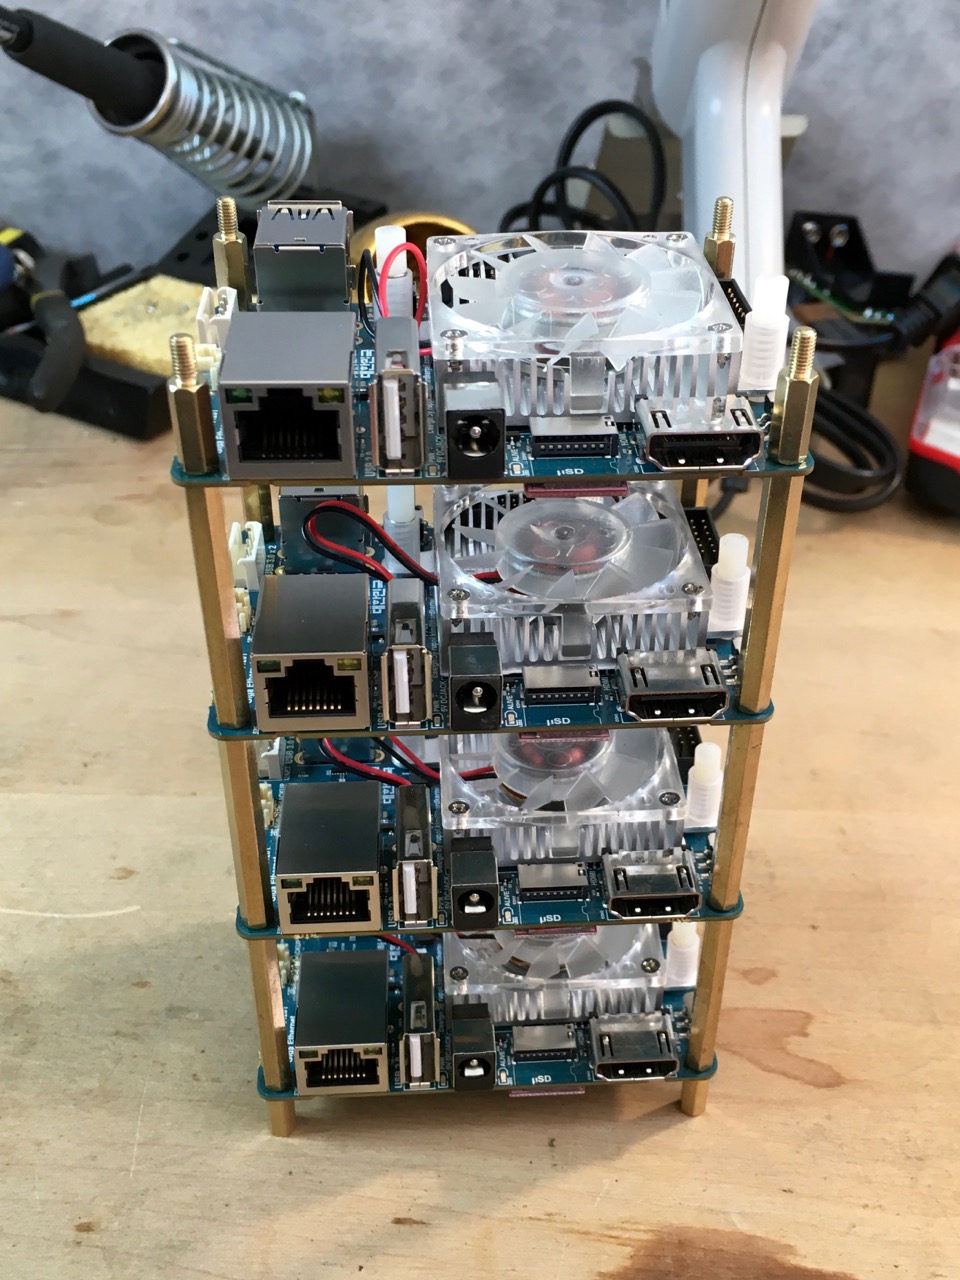 All nodes in the ODROID XU4 cluster stacked together